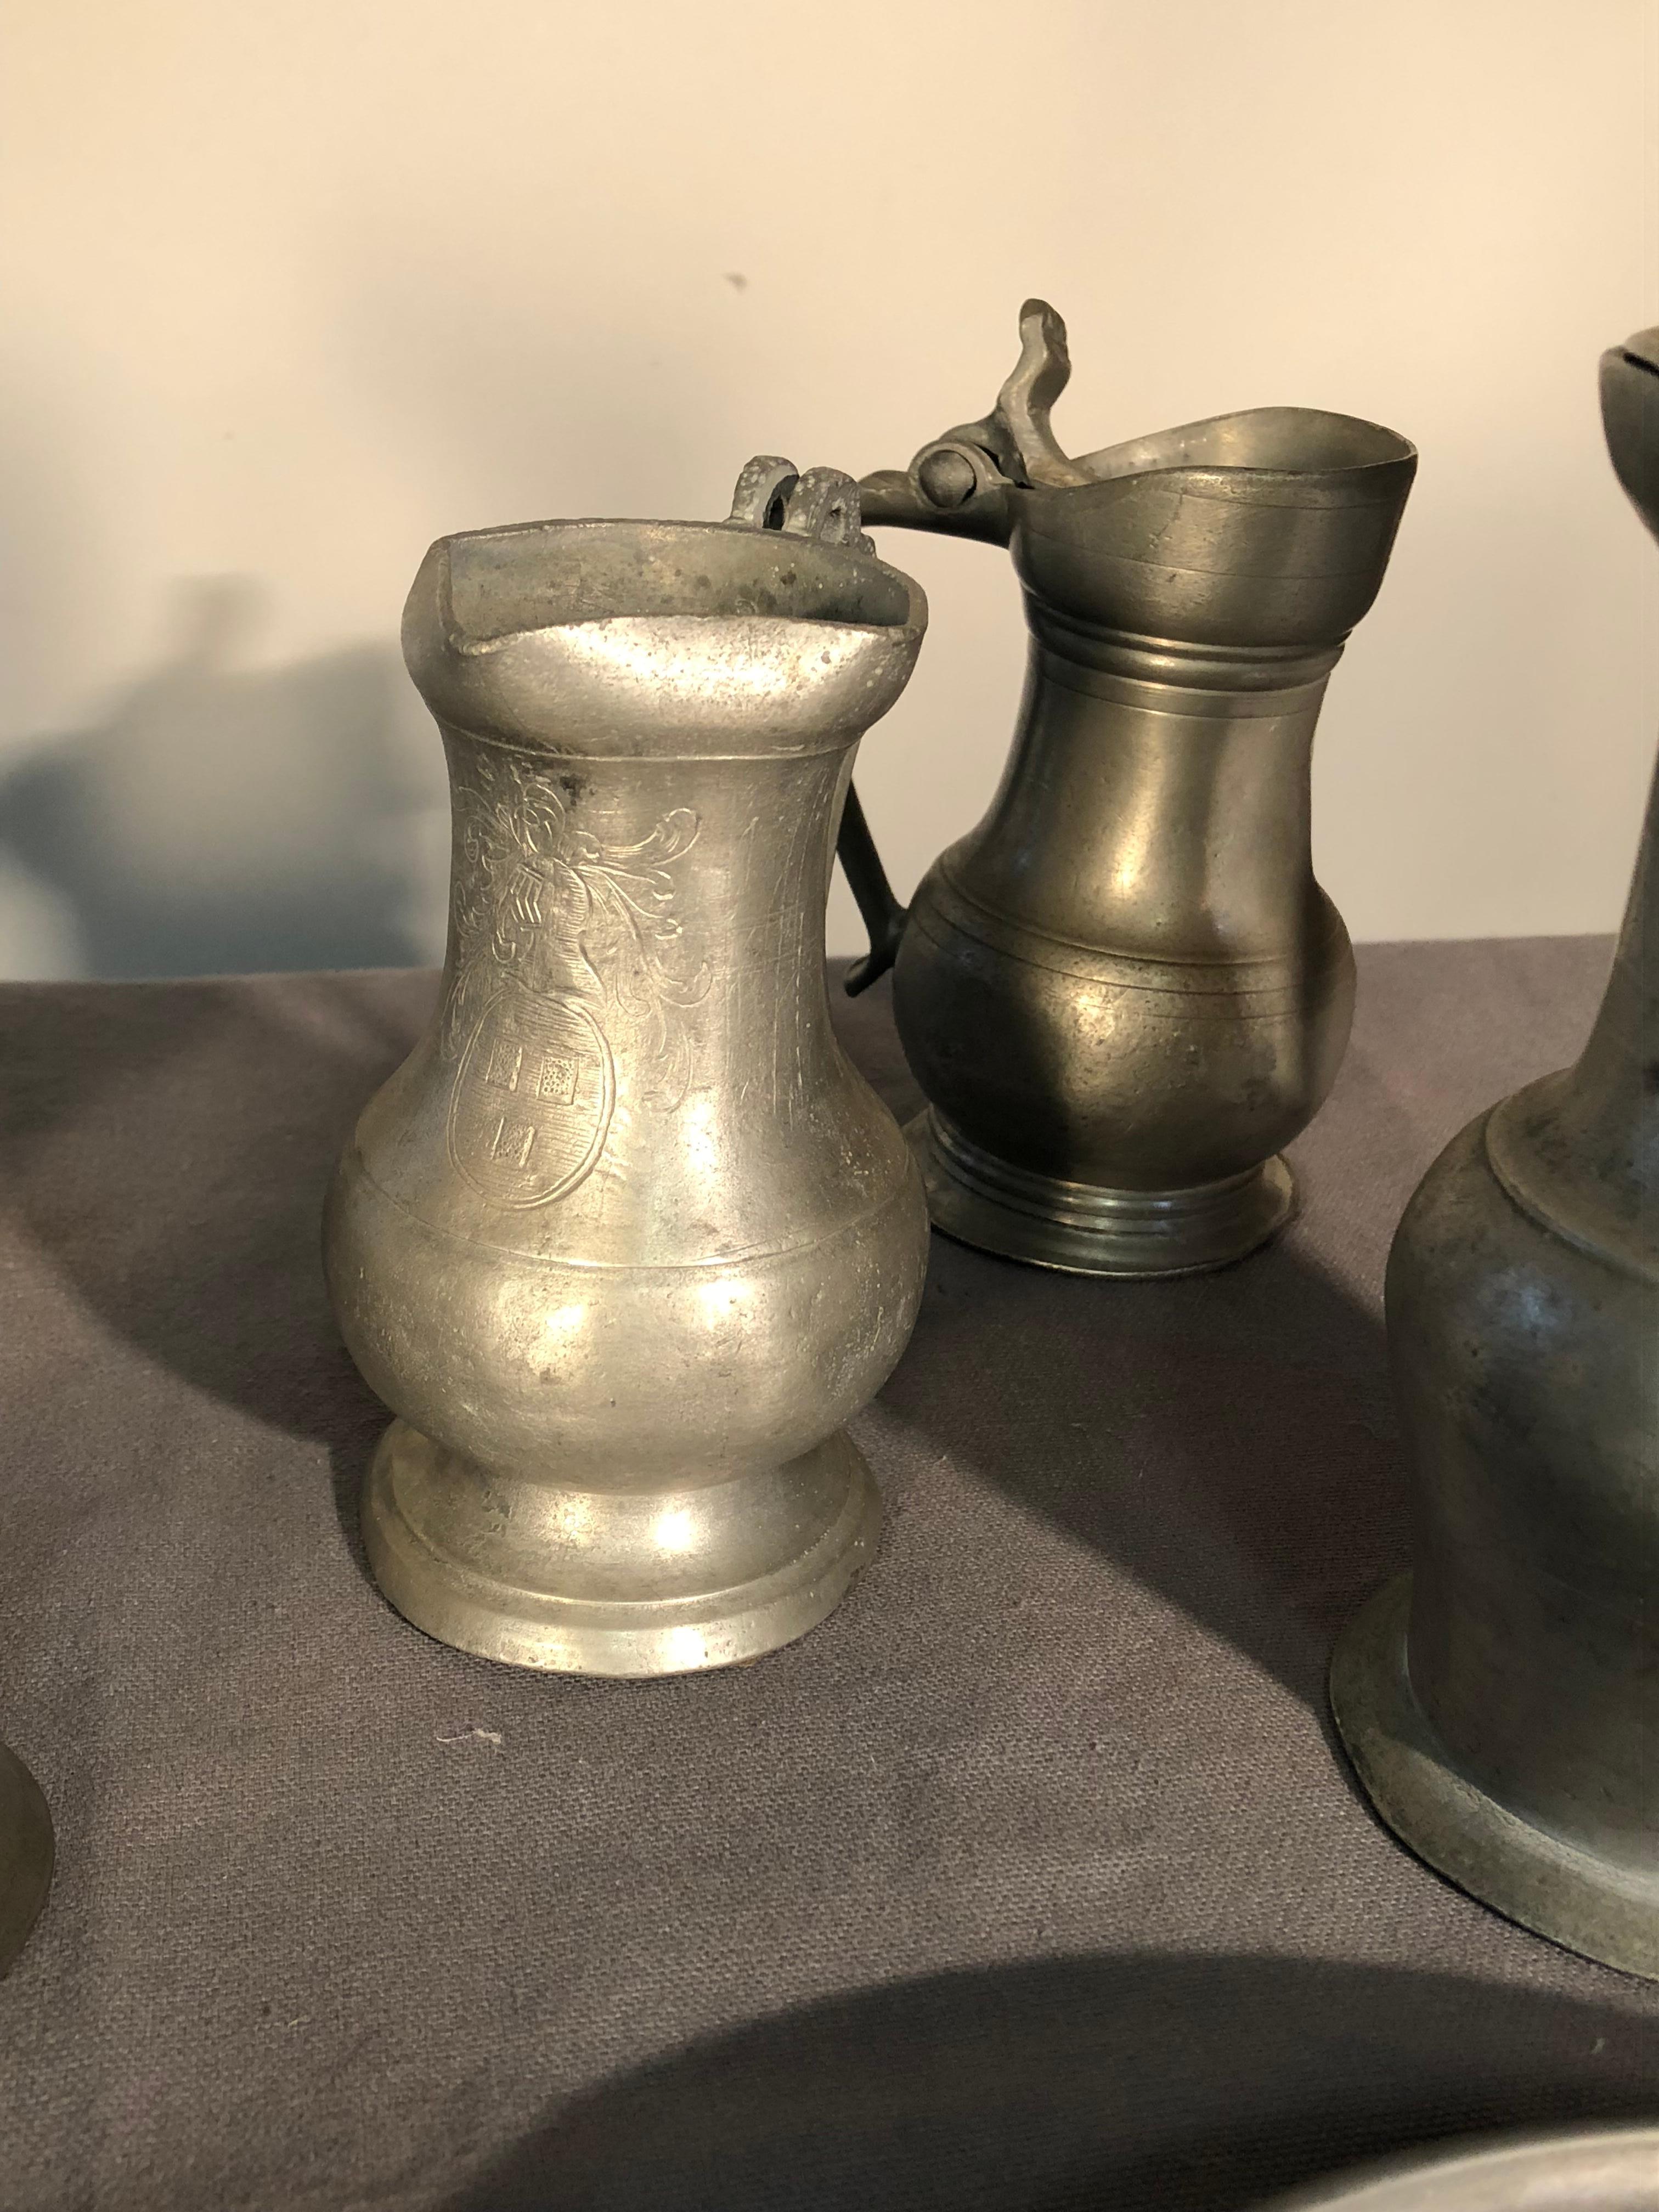 American Collection of 18th and 19th Century Pewter